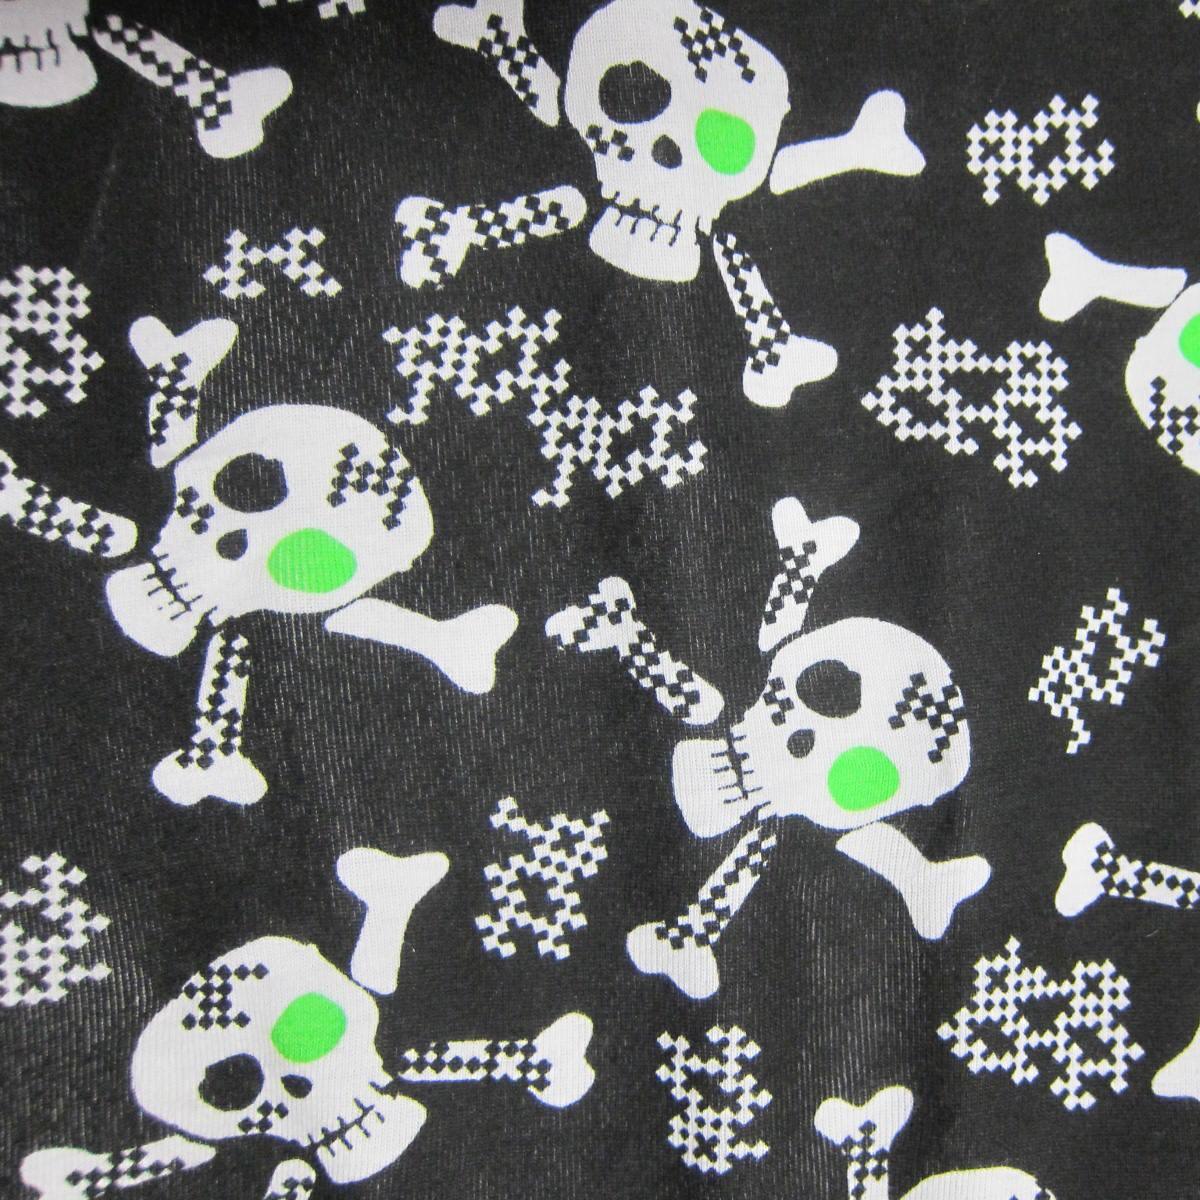 Skulls with Green Accents on Black Cotton Rib Knit